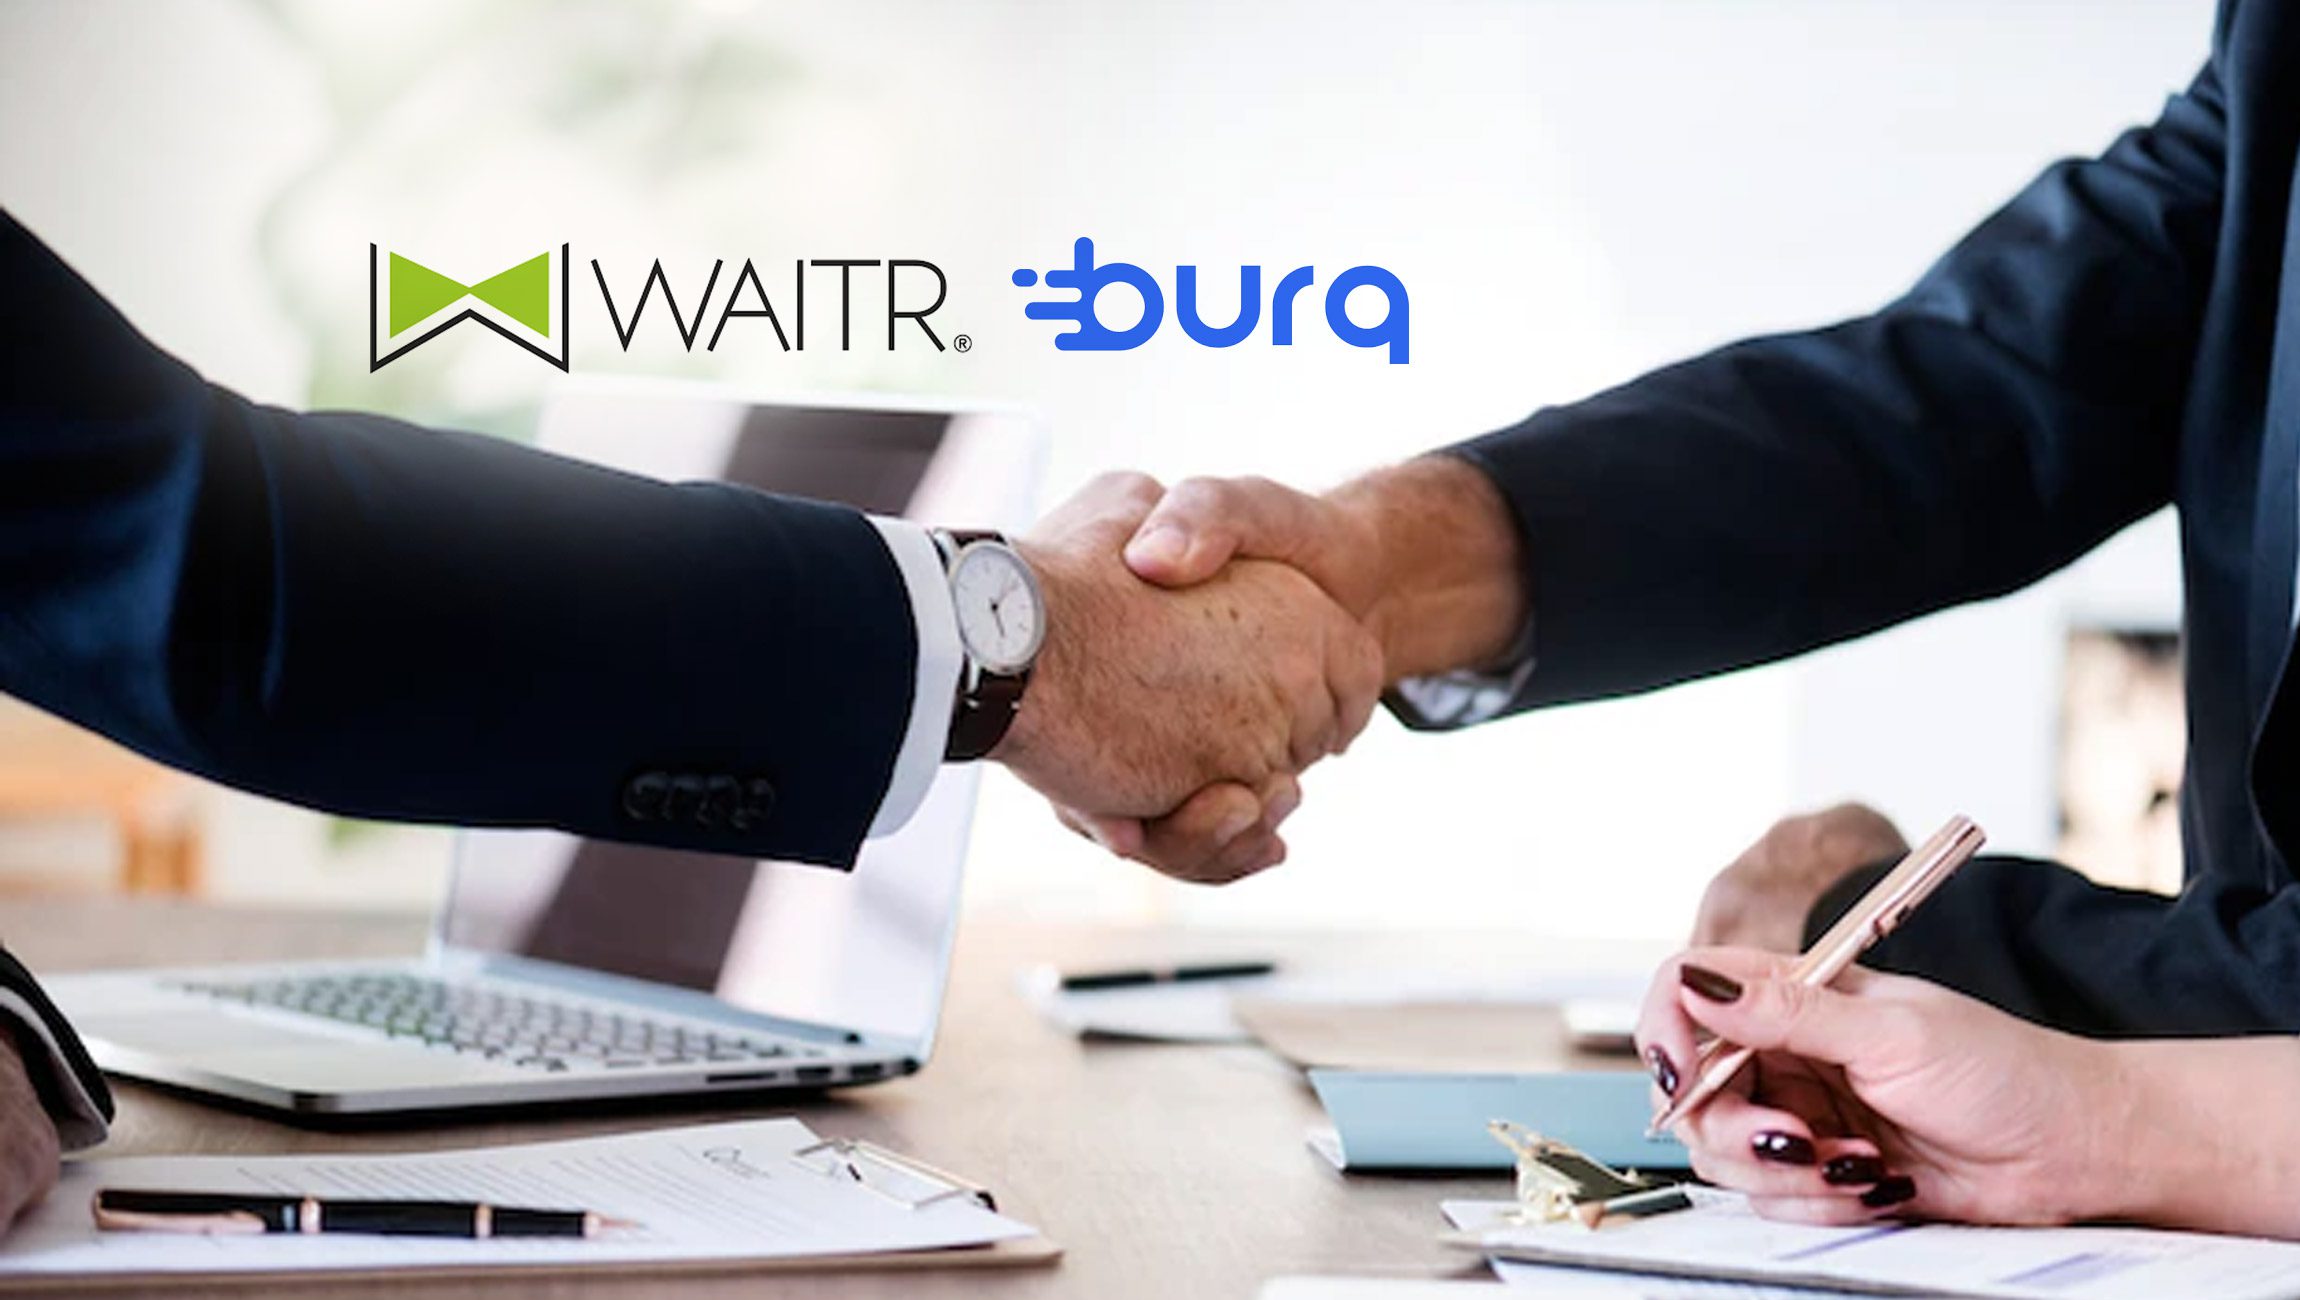 Waitr Powered by ASAP to Deliver Wide Variety of Products Through New Agreement With Burq